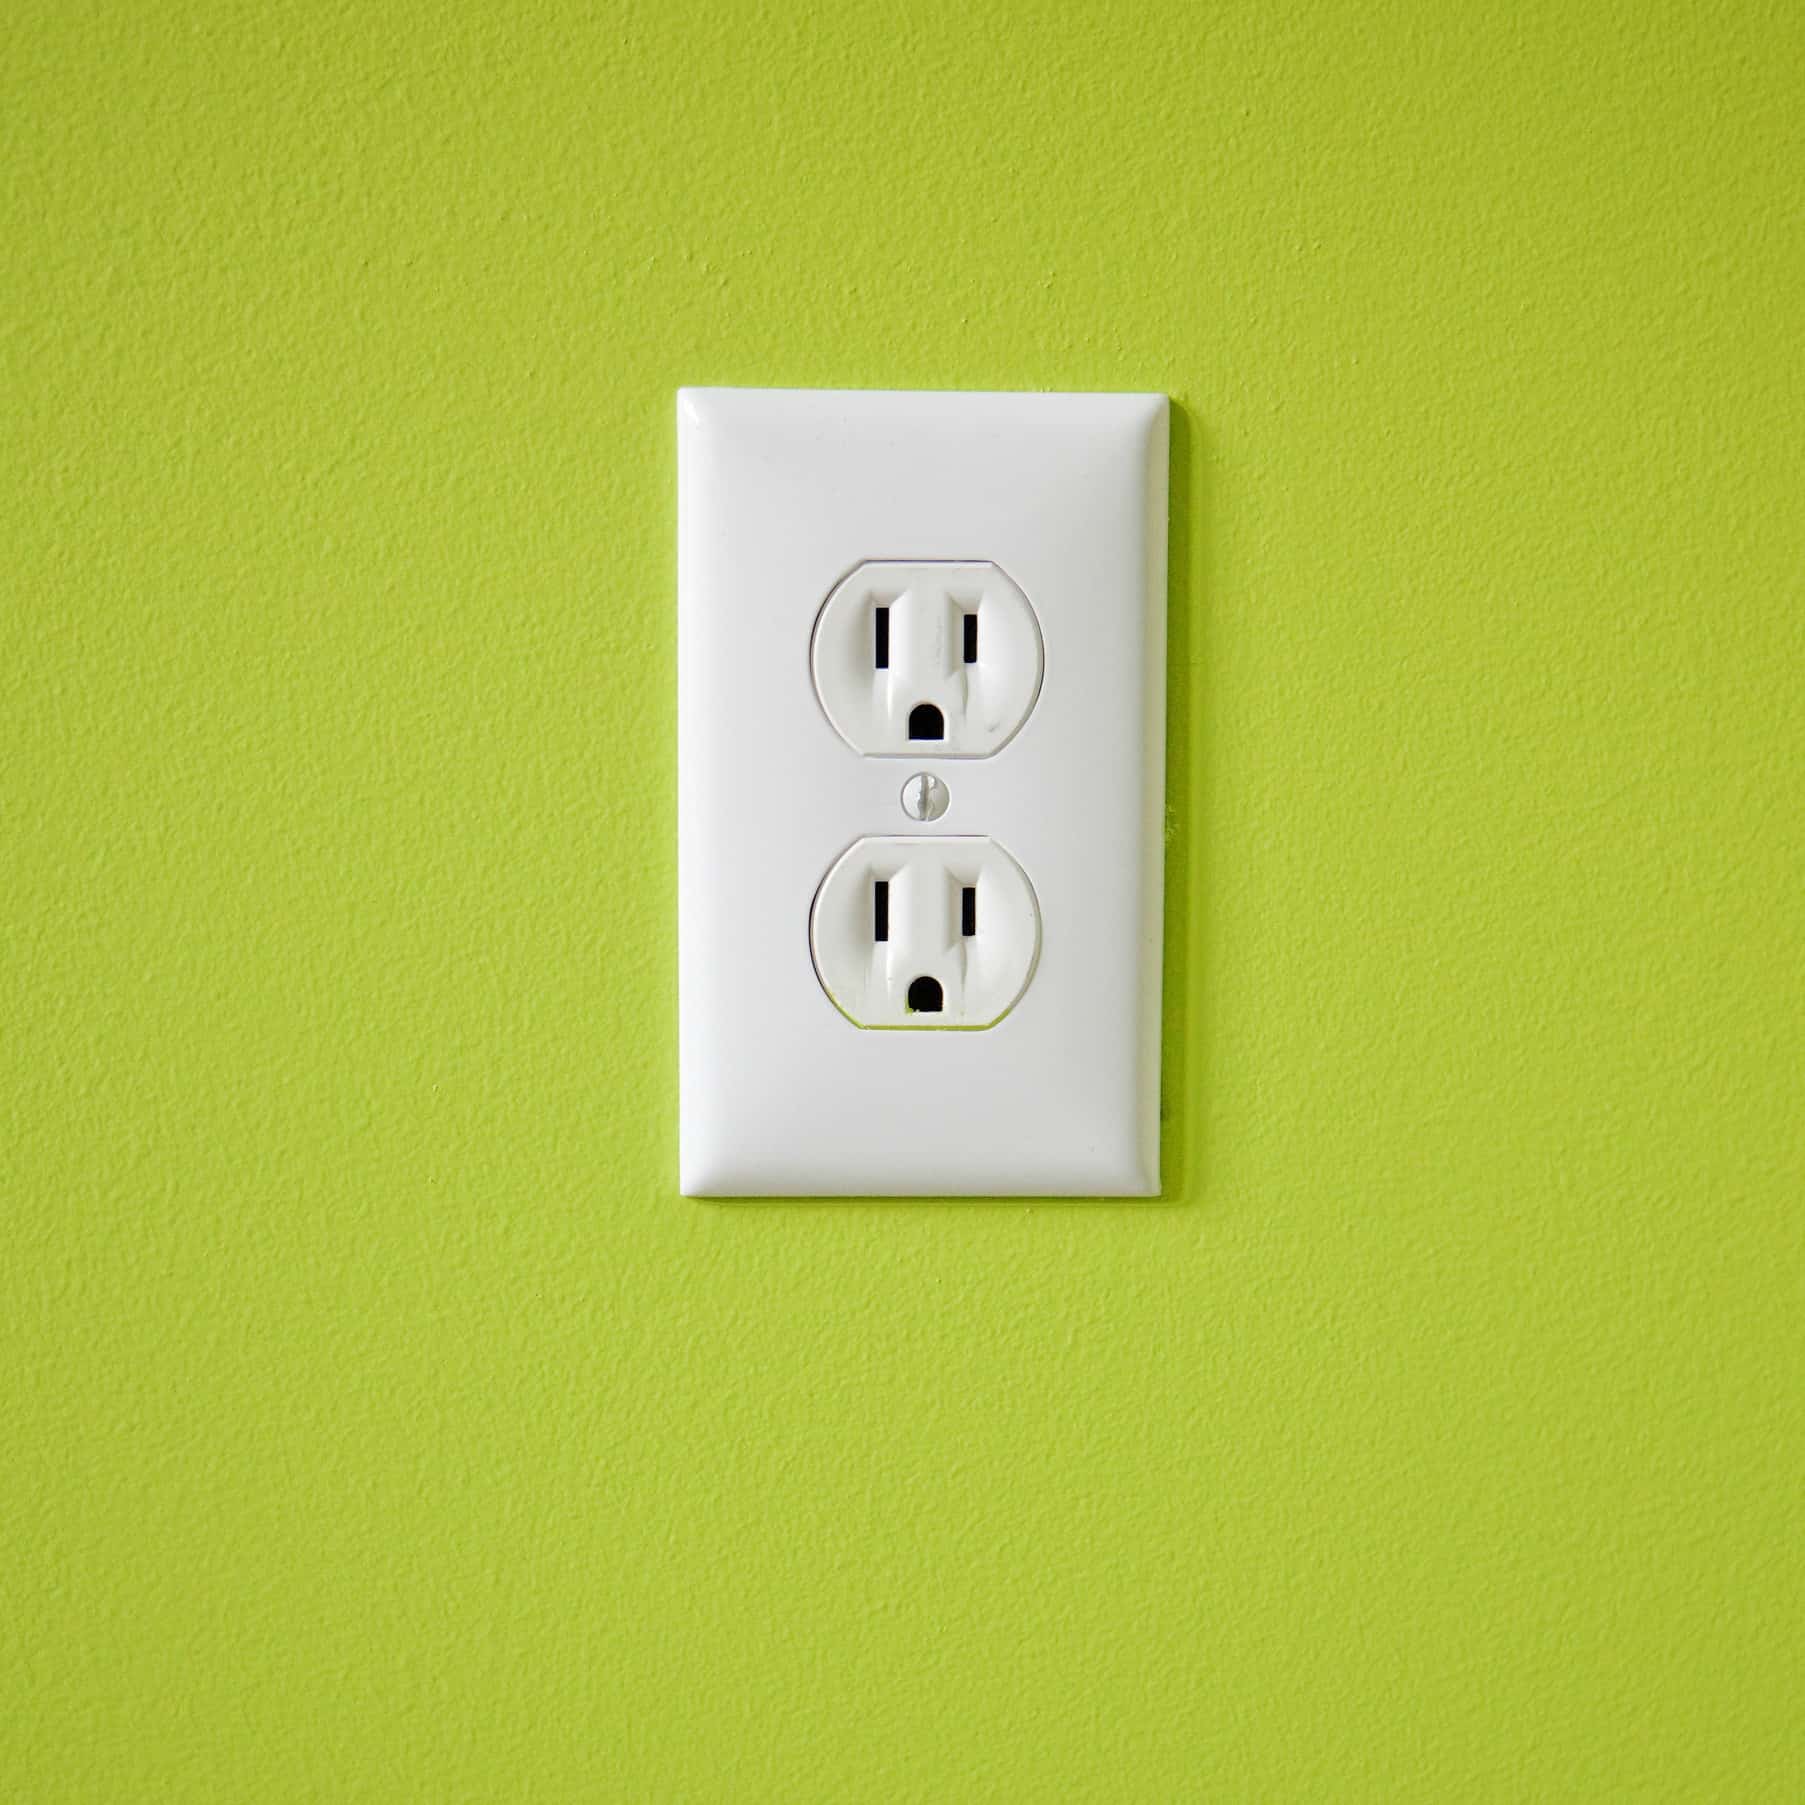 How to save money on utilities - these are the exact 10 things I've done to slash my electric bill in half!